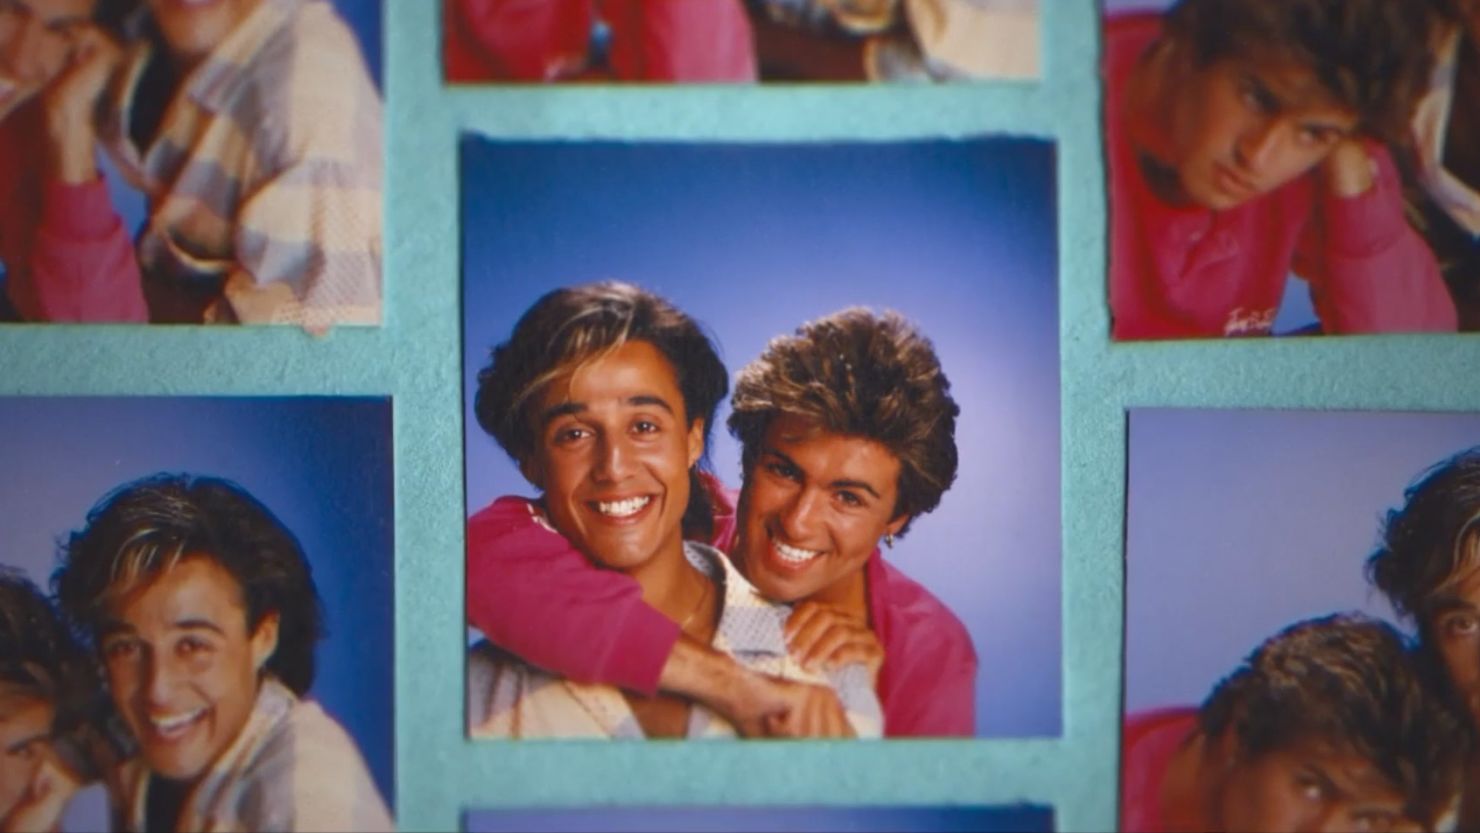 Andrew Ridgeley and George Michael are subjects of a new documentary, "Wham!" 